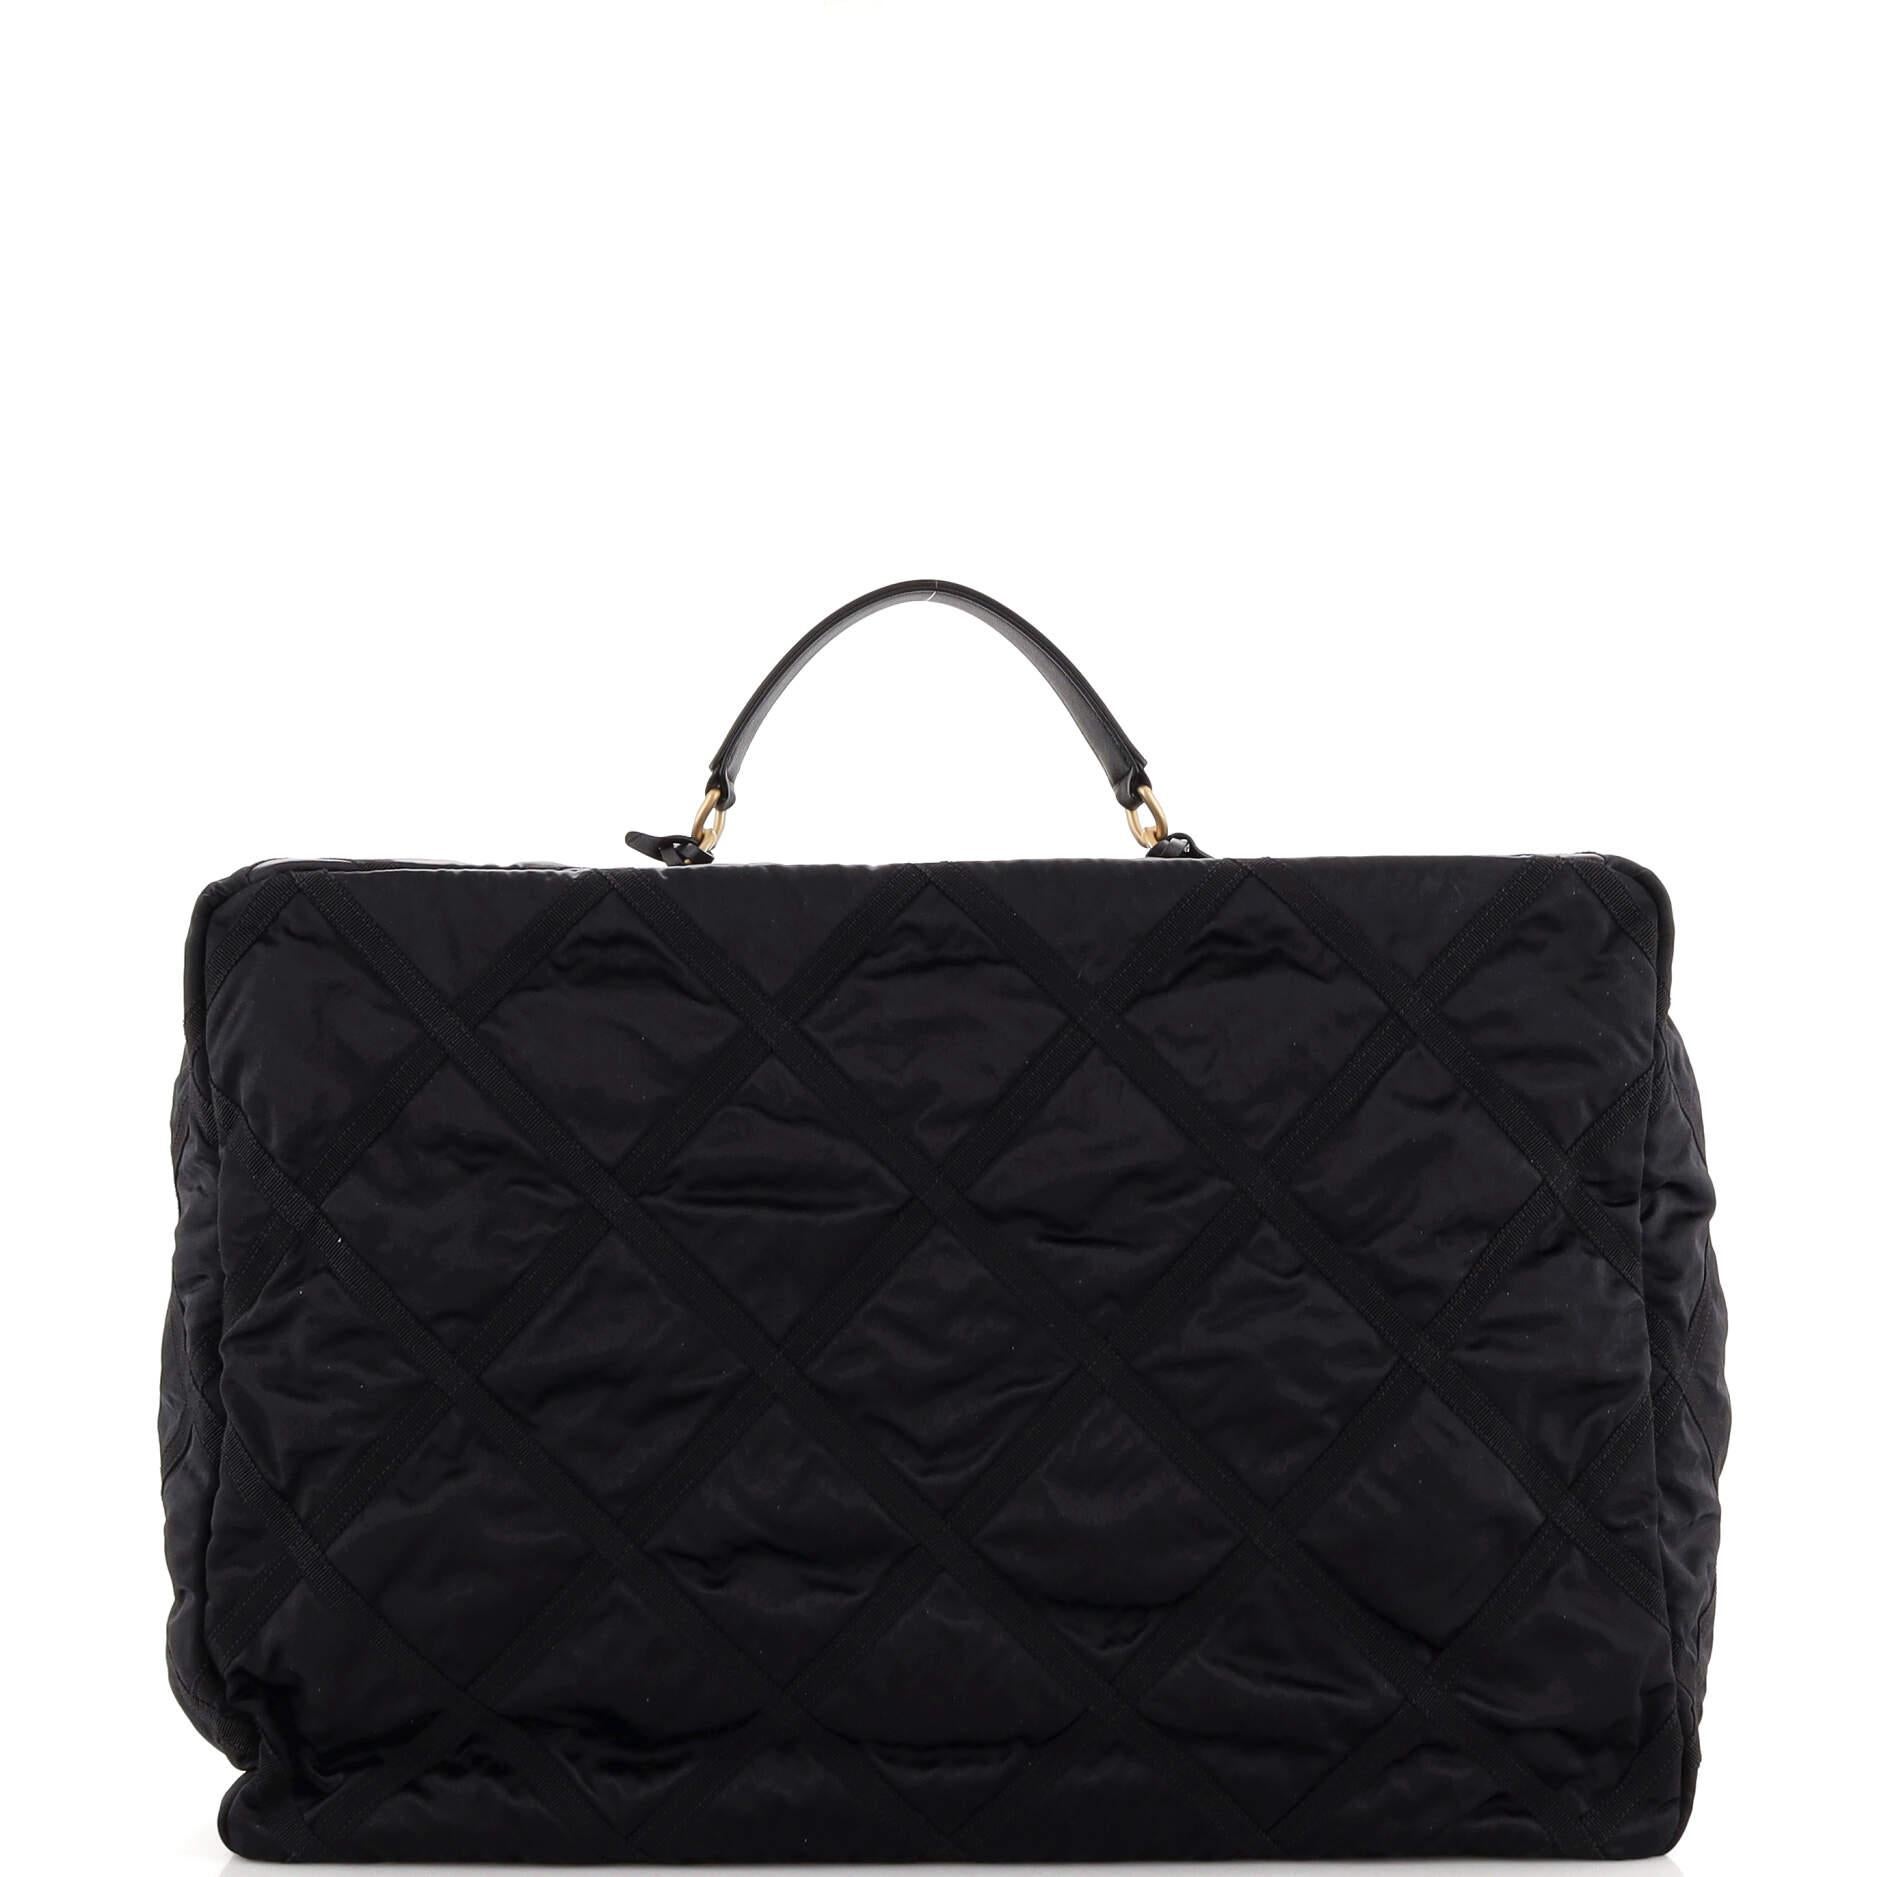 Women's or Men's Chanel Lifestyle Travel Handbag Quilted Nylon with Grosgrain Large For Sale